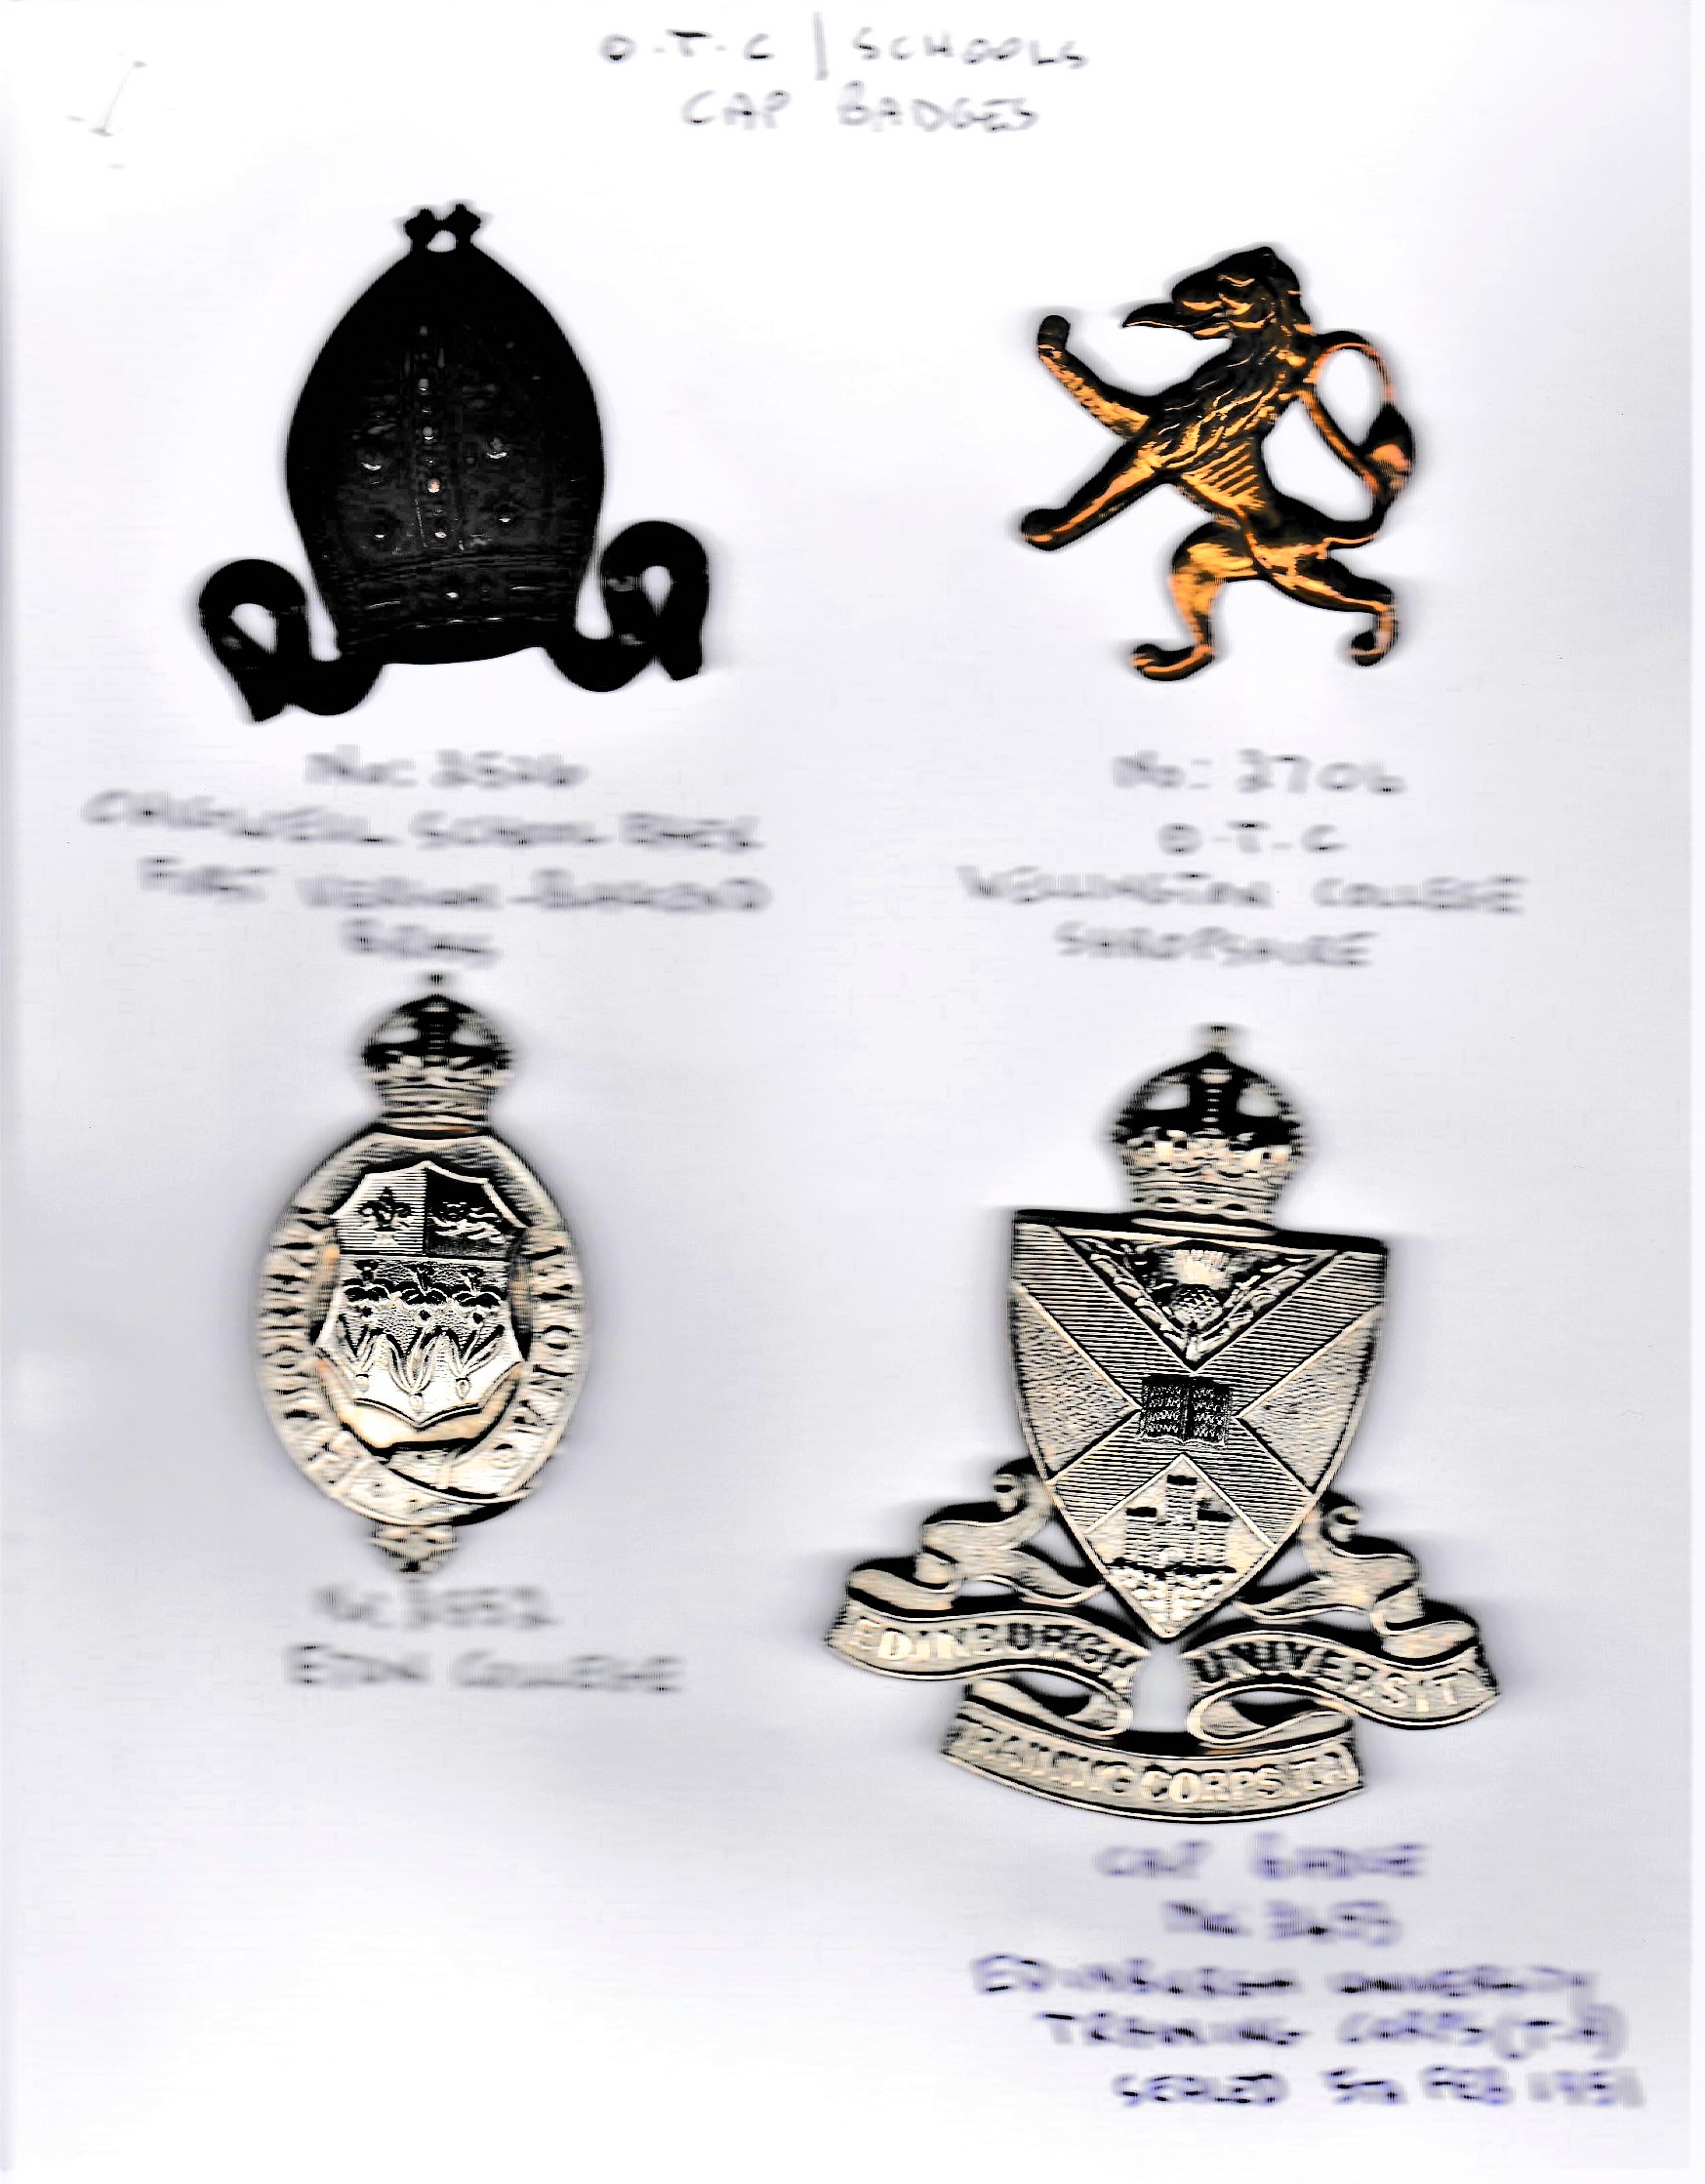 Officers Training College/School Cap Badge (4) including: Chigwell School Essex First Version (